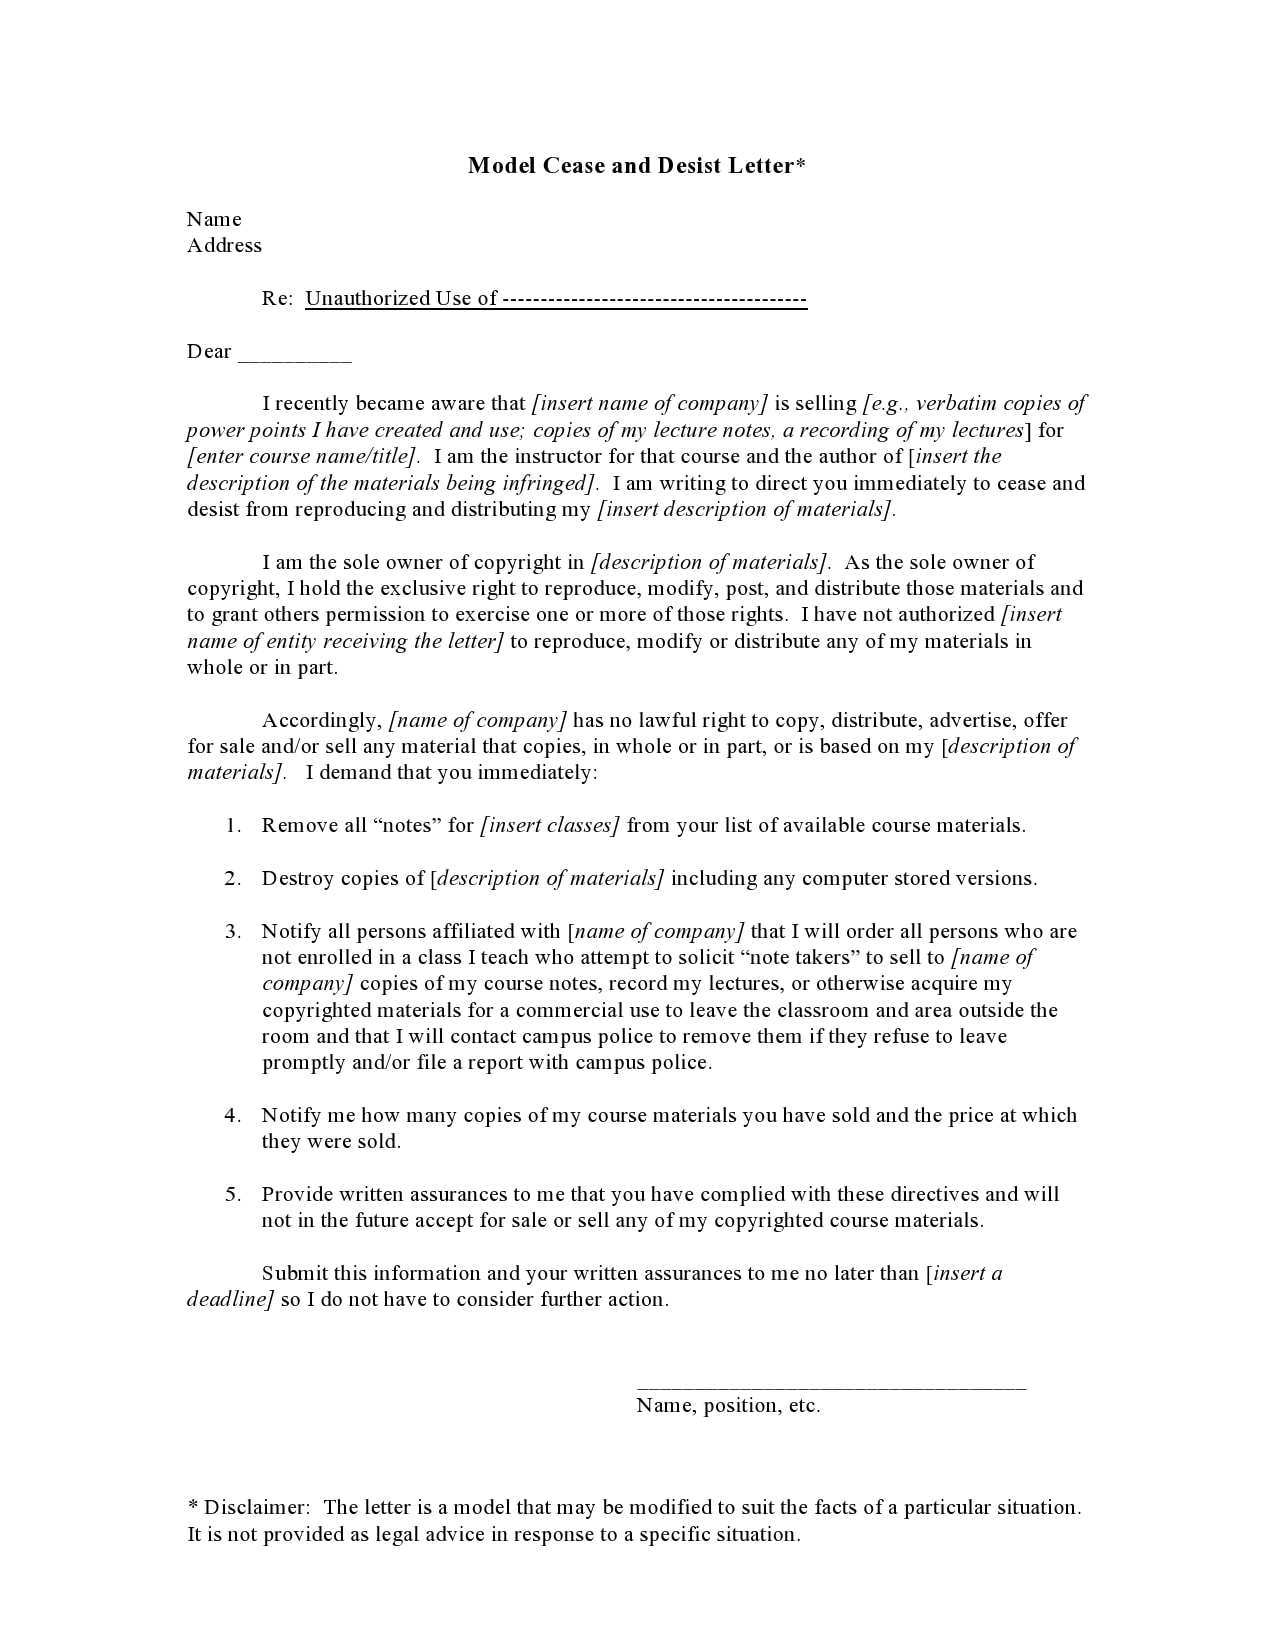 Cease & Desist Letter Template from templatearchive.com